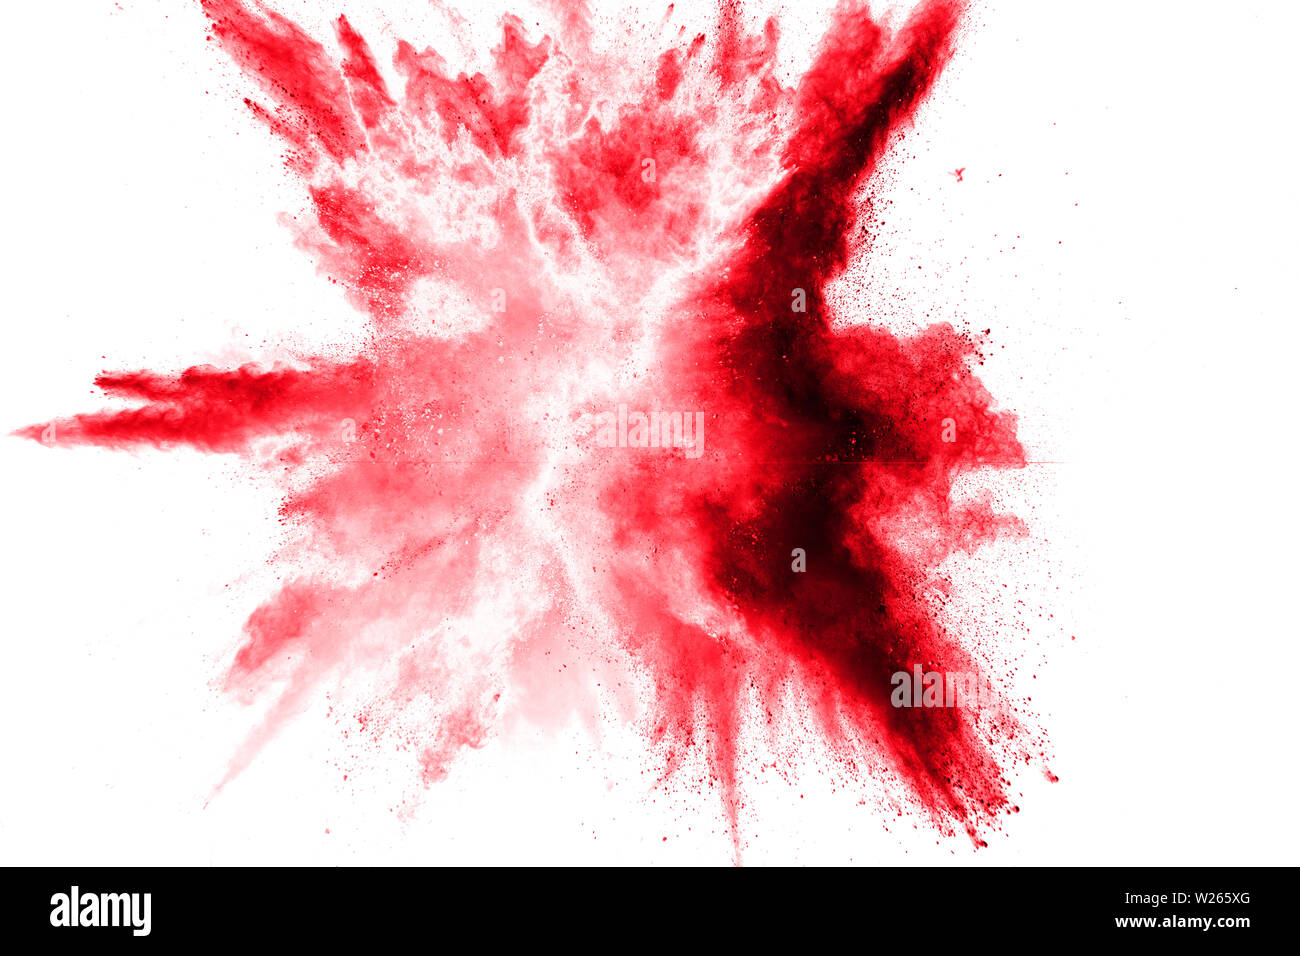 Abstract red dust splattered on white background. Red powder explosion.Freeze motion of red particles splash. Stock Photo